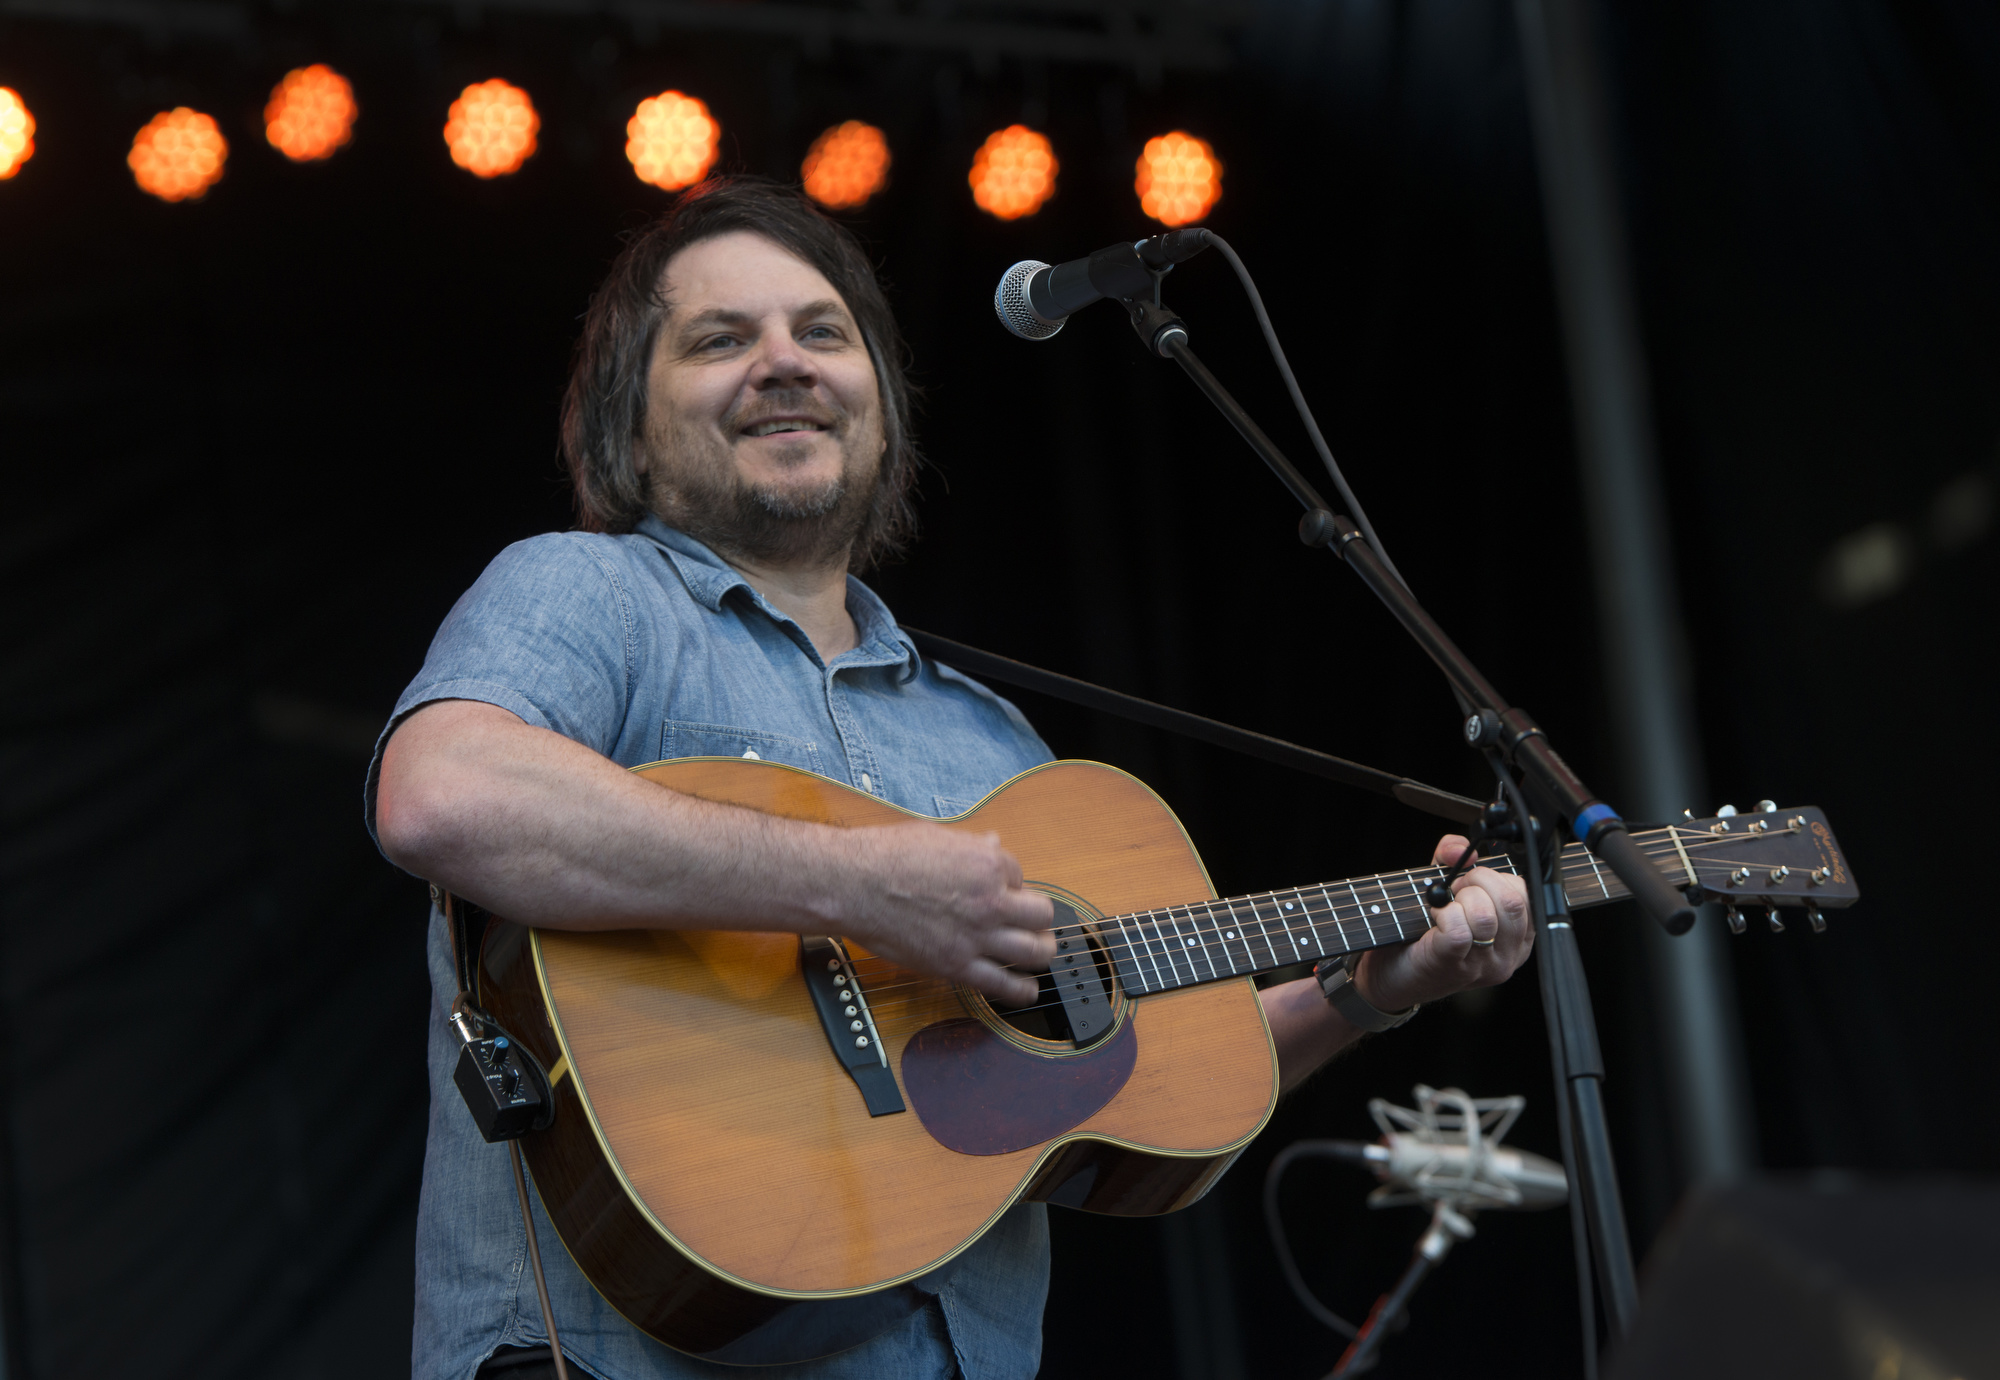 Jeff Tweedy, frontman for the nationally known alt-rock band Wilco, plays a new song on opening night of the festival.